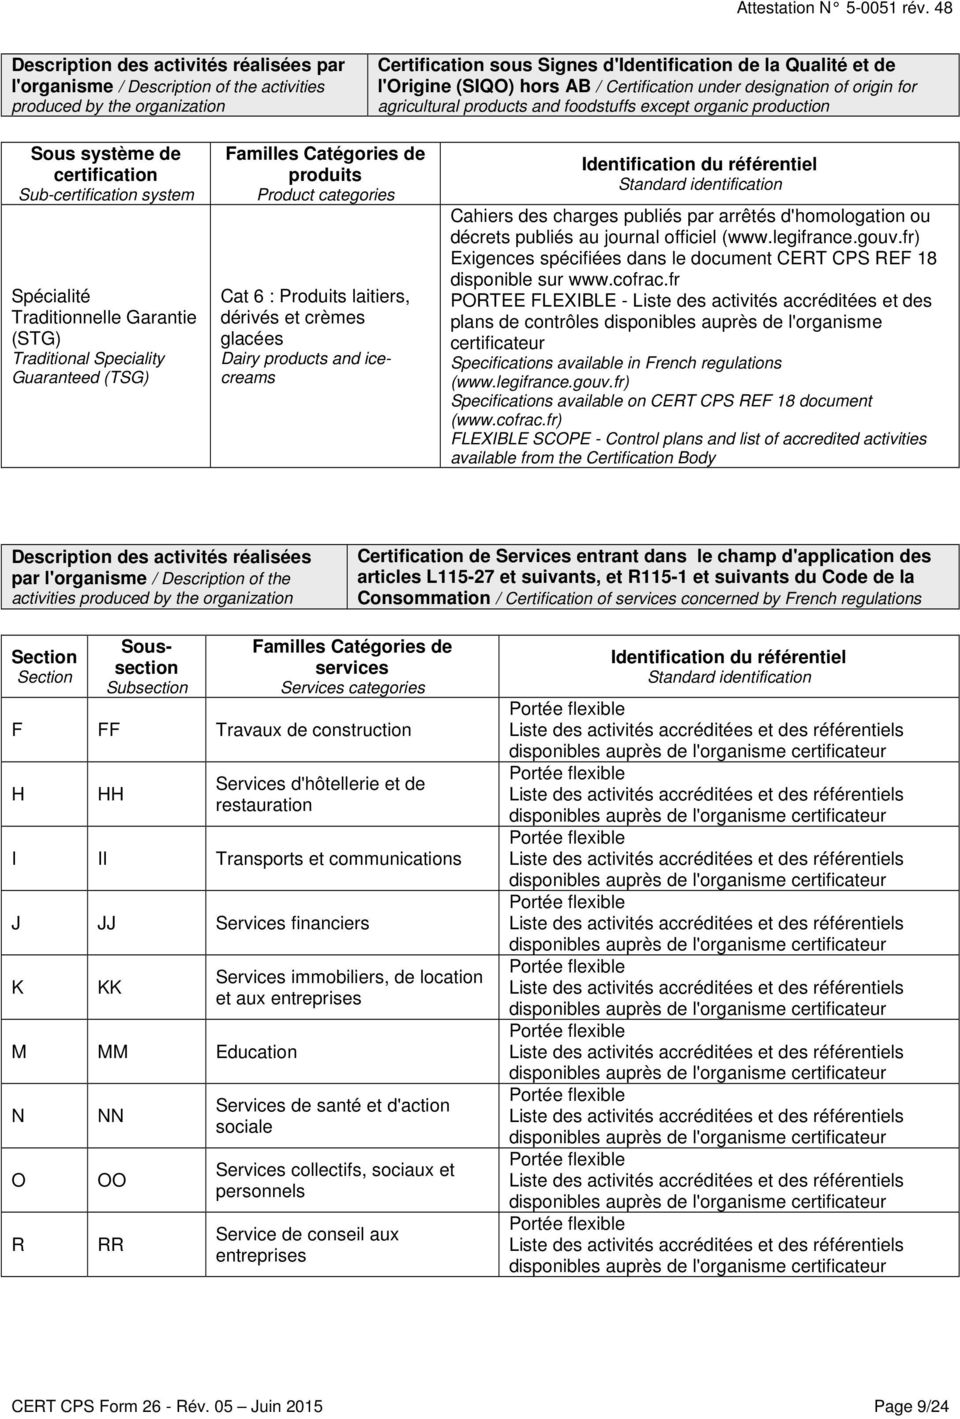 auprès de l'organisme certificateur Specifications available in French regulations Specifications available on CERT CPS REF 18 document (www.cofrac.